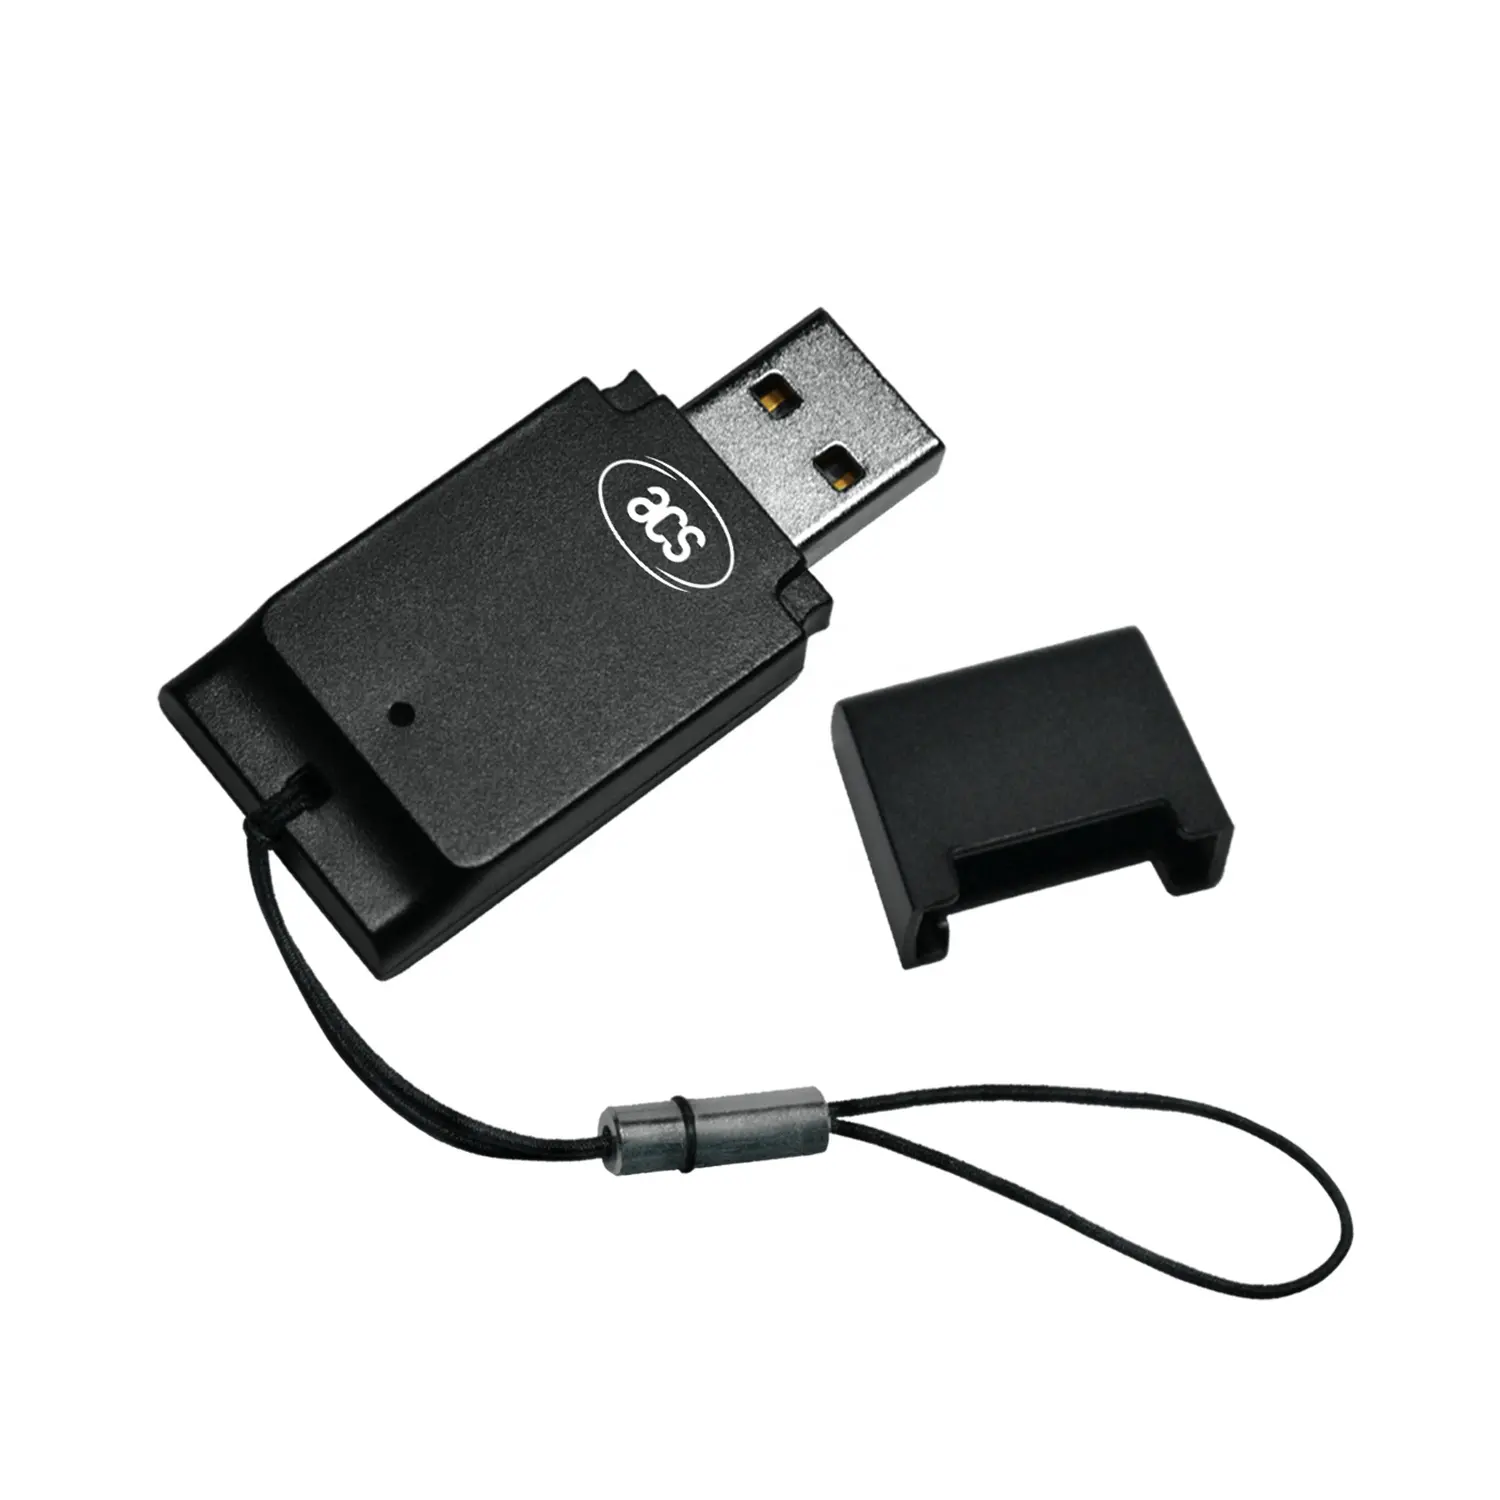 Best Windows Linux Mac OS Android ISO 7816 Small Mini Smart Card Reader Portable ACR39T-A1